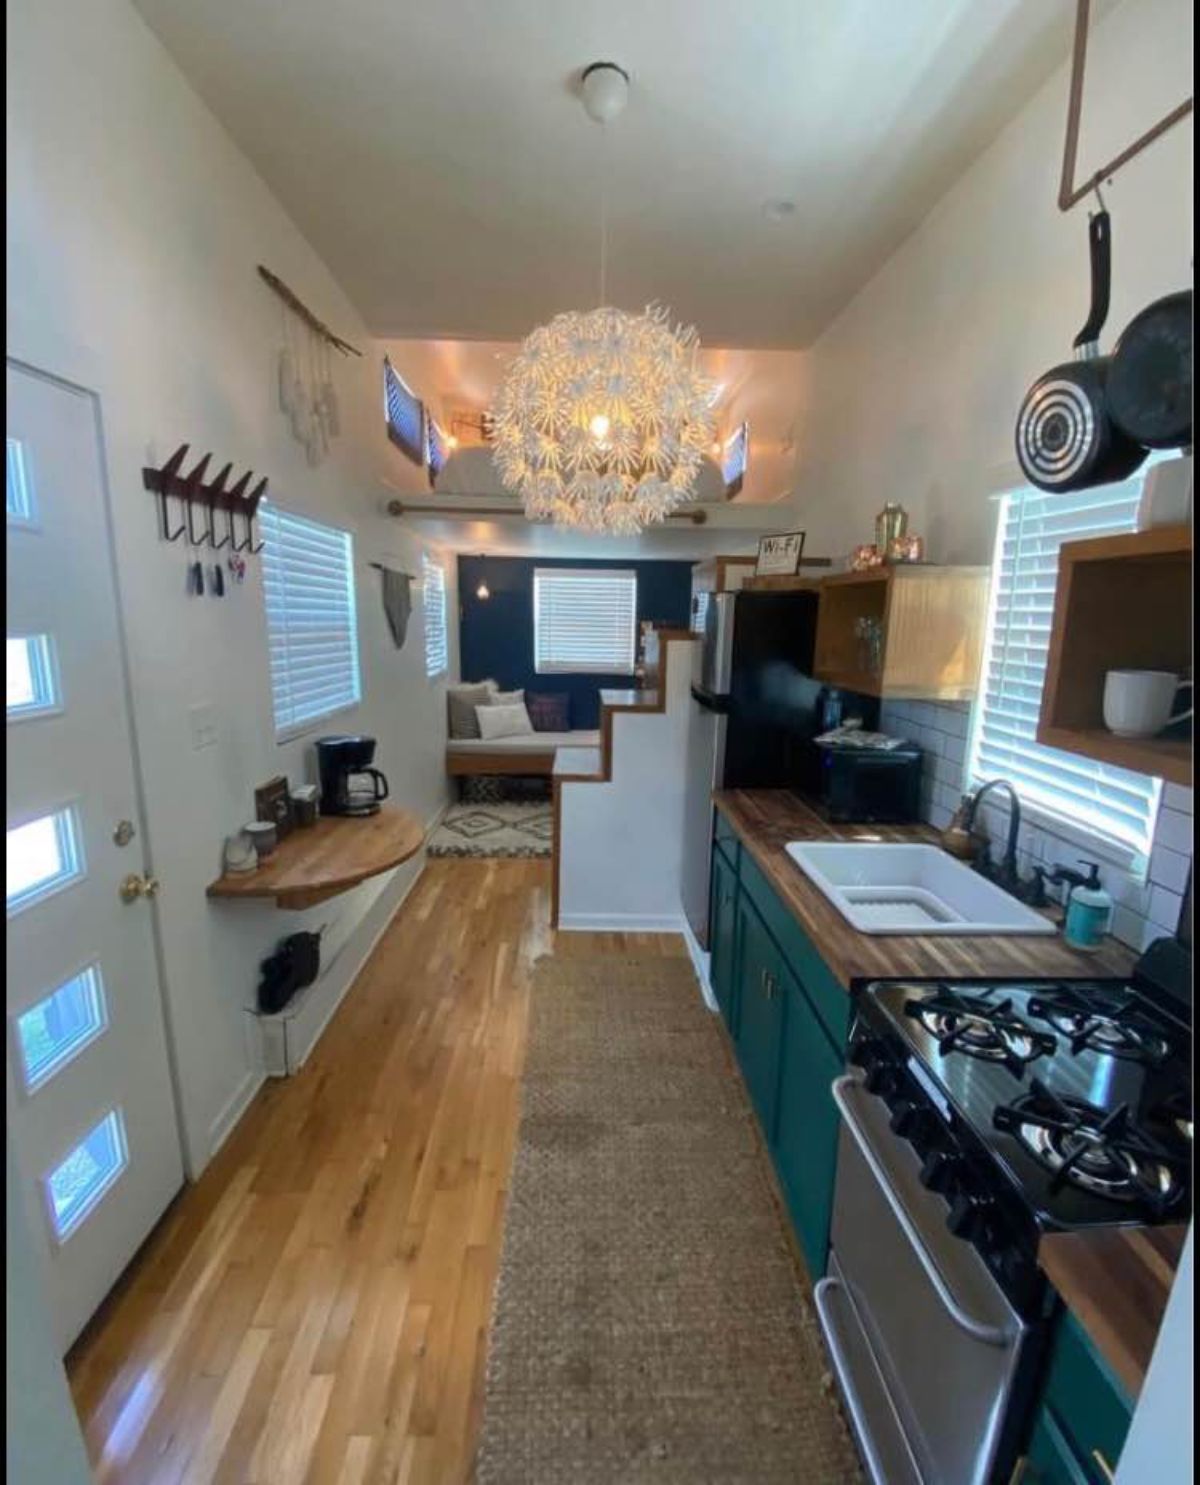 Full view of stunning 24' Tiny Home from inside